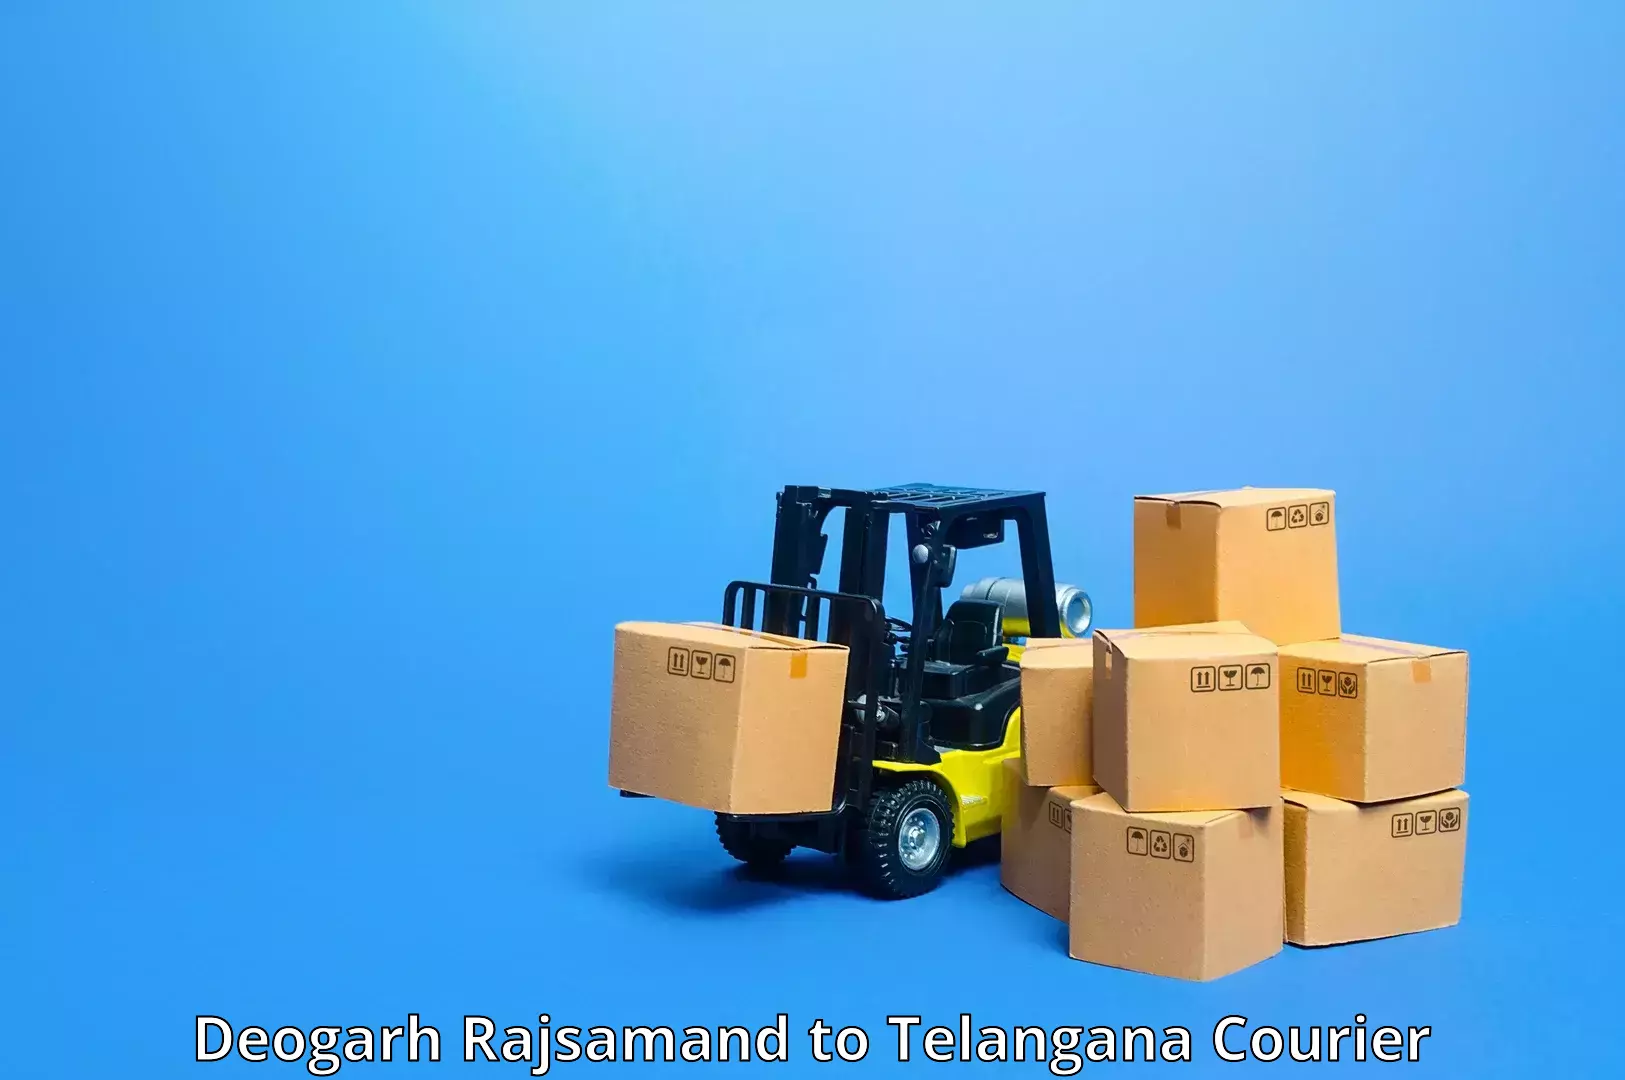 On-call courier service Deogarh Rajsamand to Adilabad